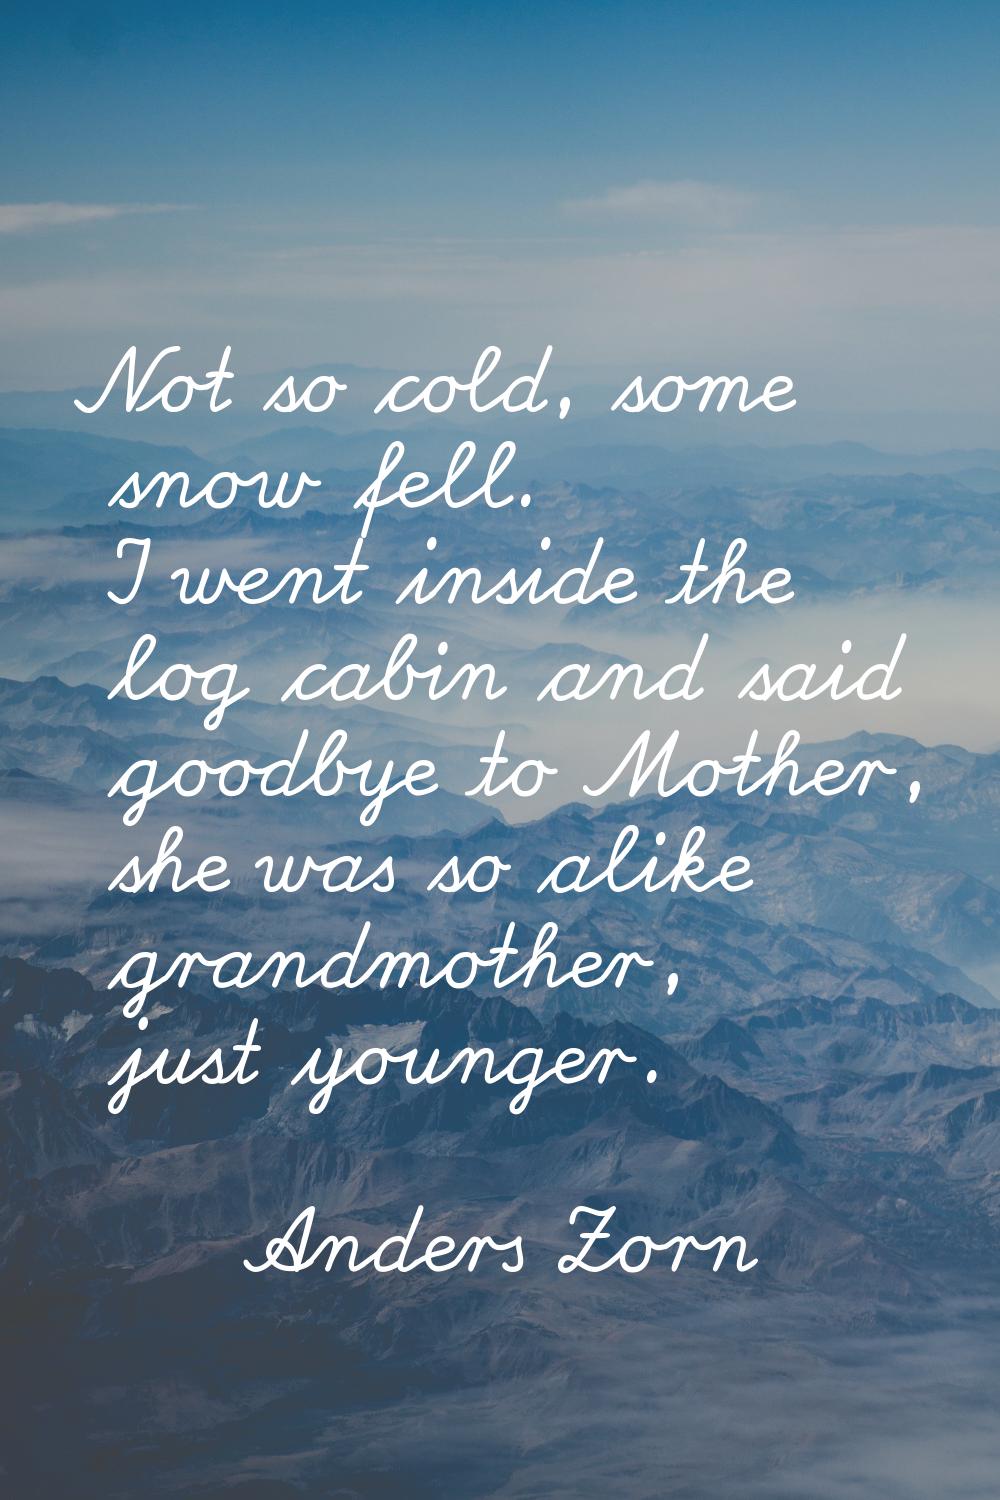 Not so cold, some snow fell. I went inside the log cabin and said goodbye to Mother, she was so ali